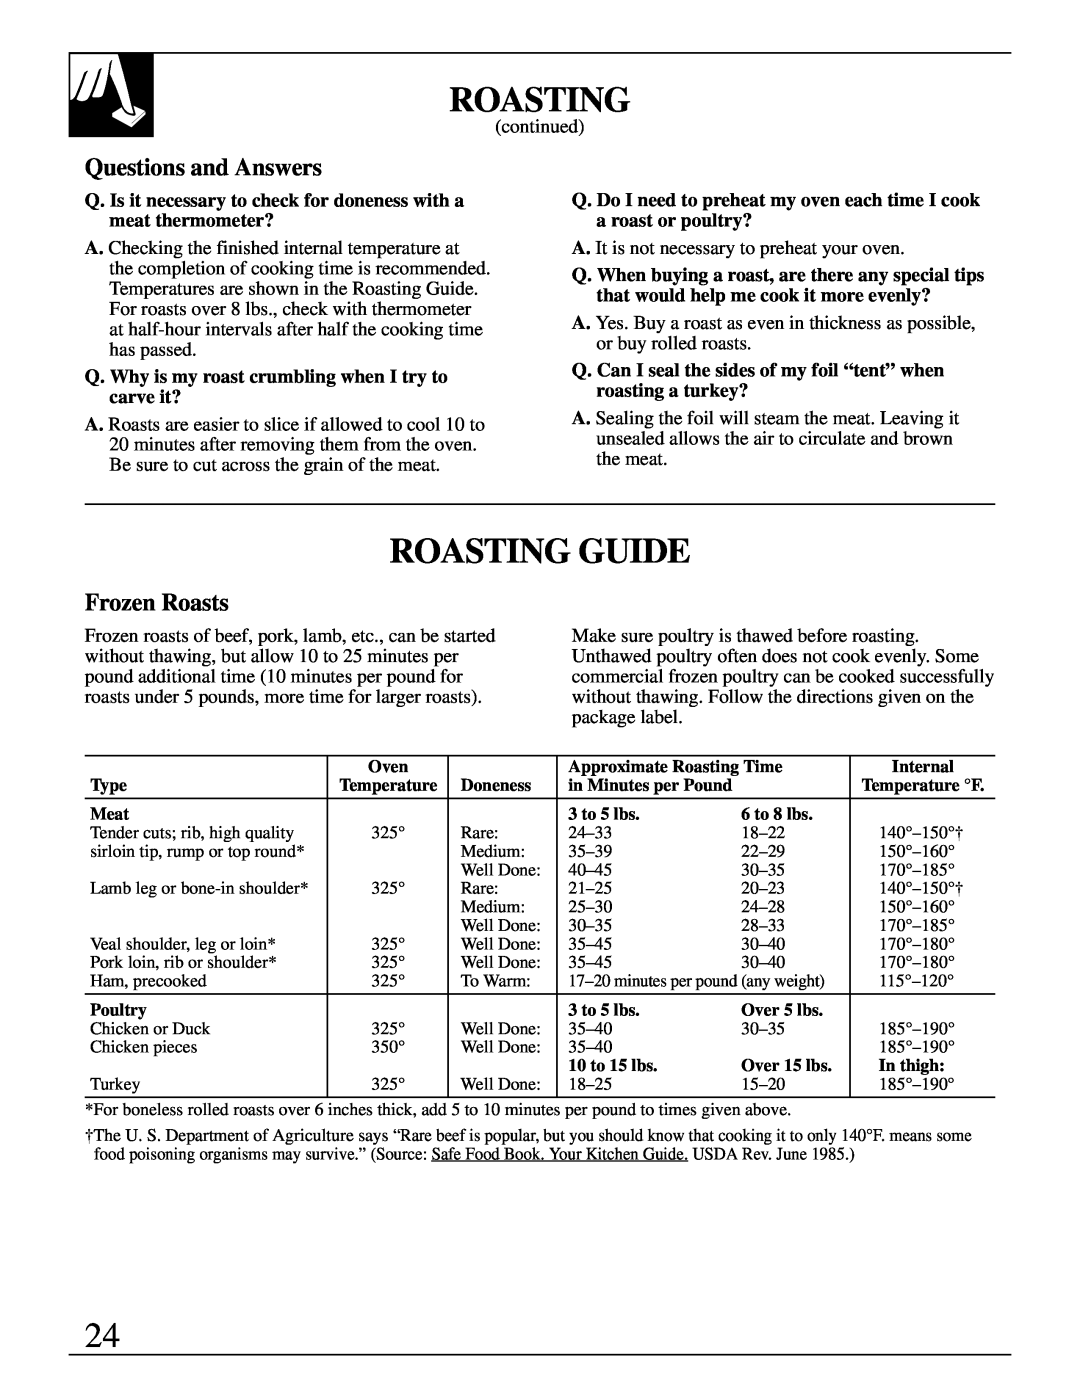 GE 49-8723, 4164D2966P234 warranty Roasting Guide, Frozen Roasts, Questions and Answers 